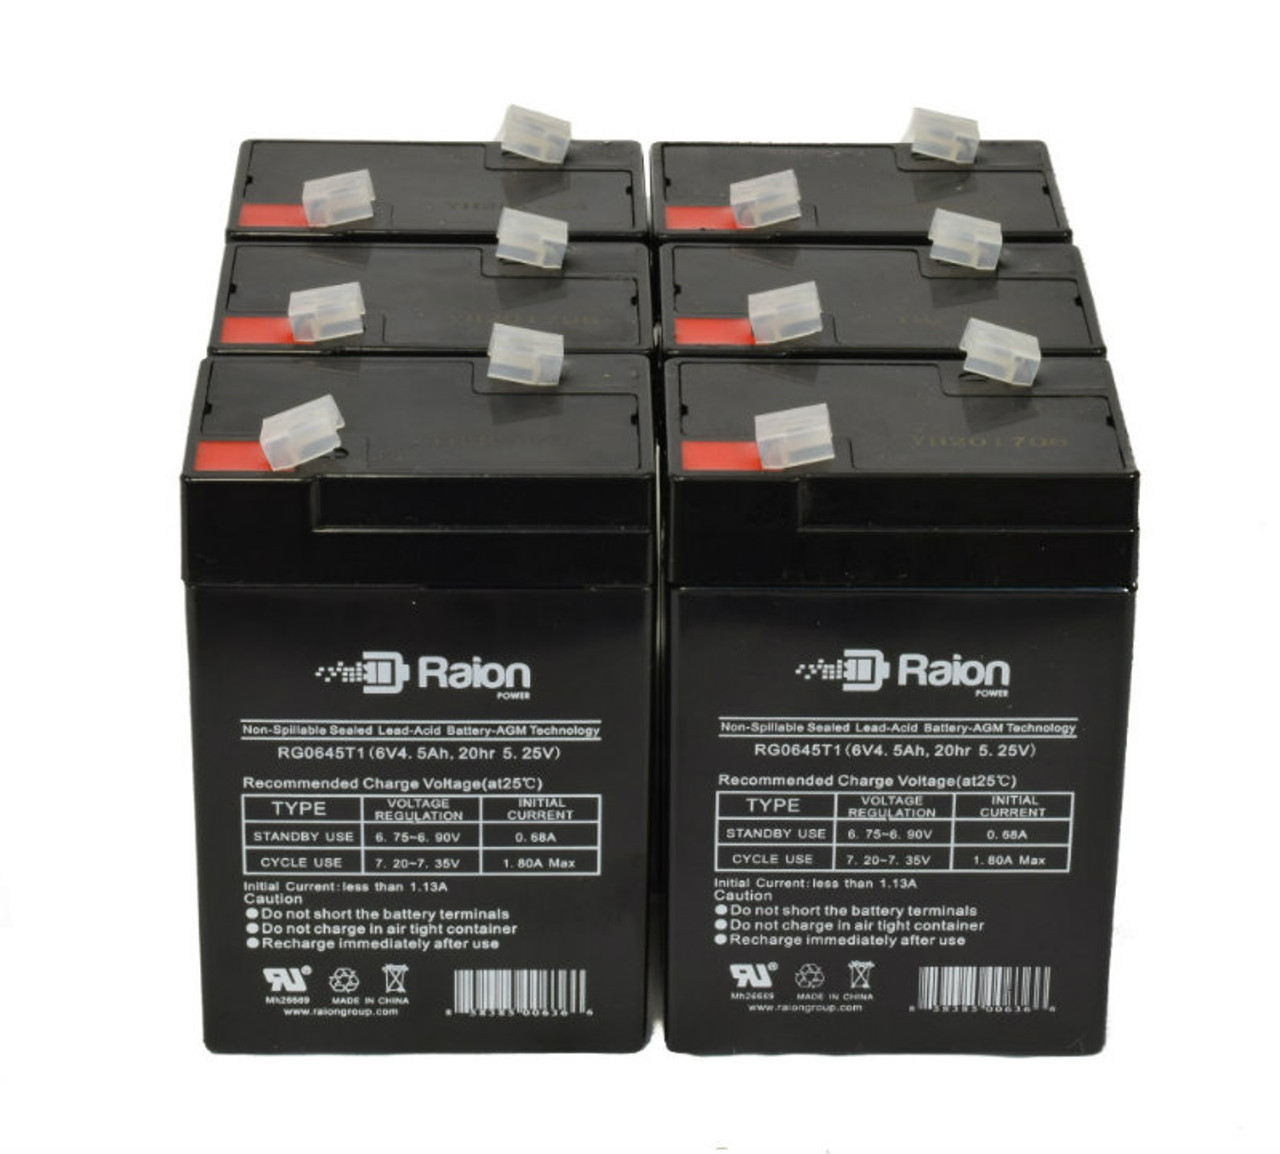 Raion Power RG0645T1 6V 4.5Ah Replacement Medical Equipment Battery for Arjo-Century SARA Plus Standing Aid - 6 Pack